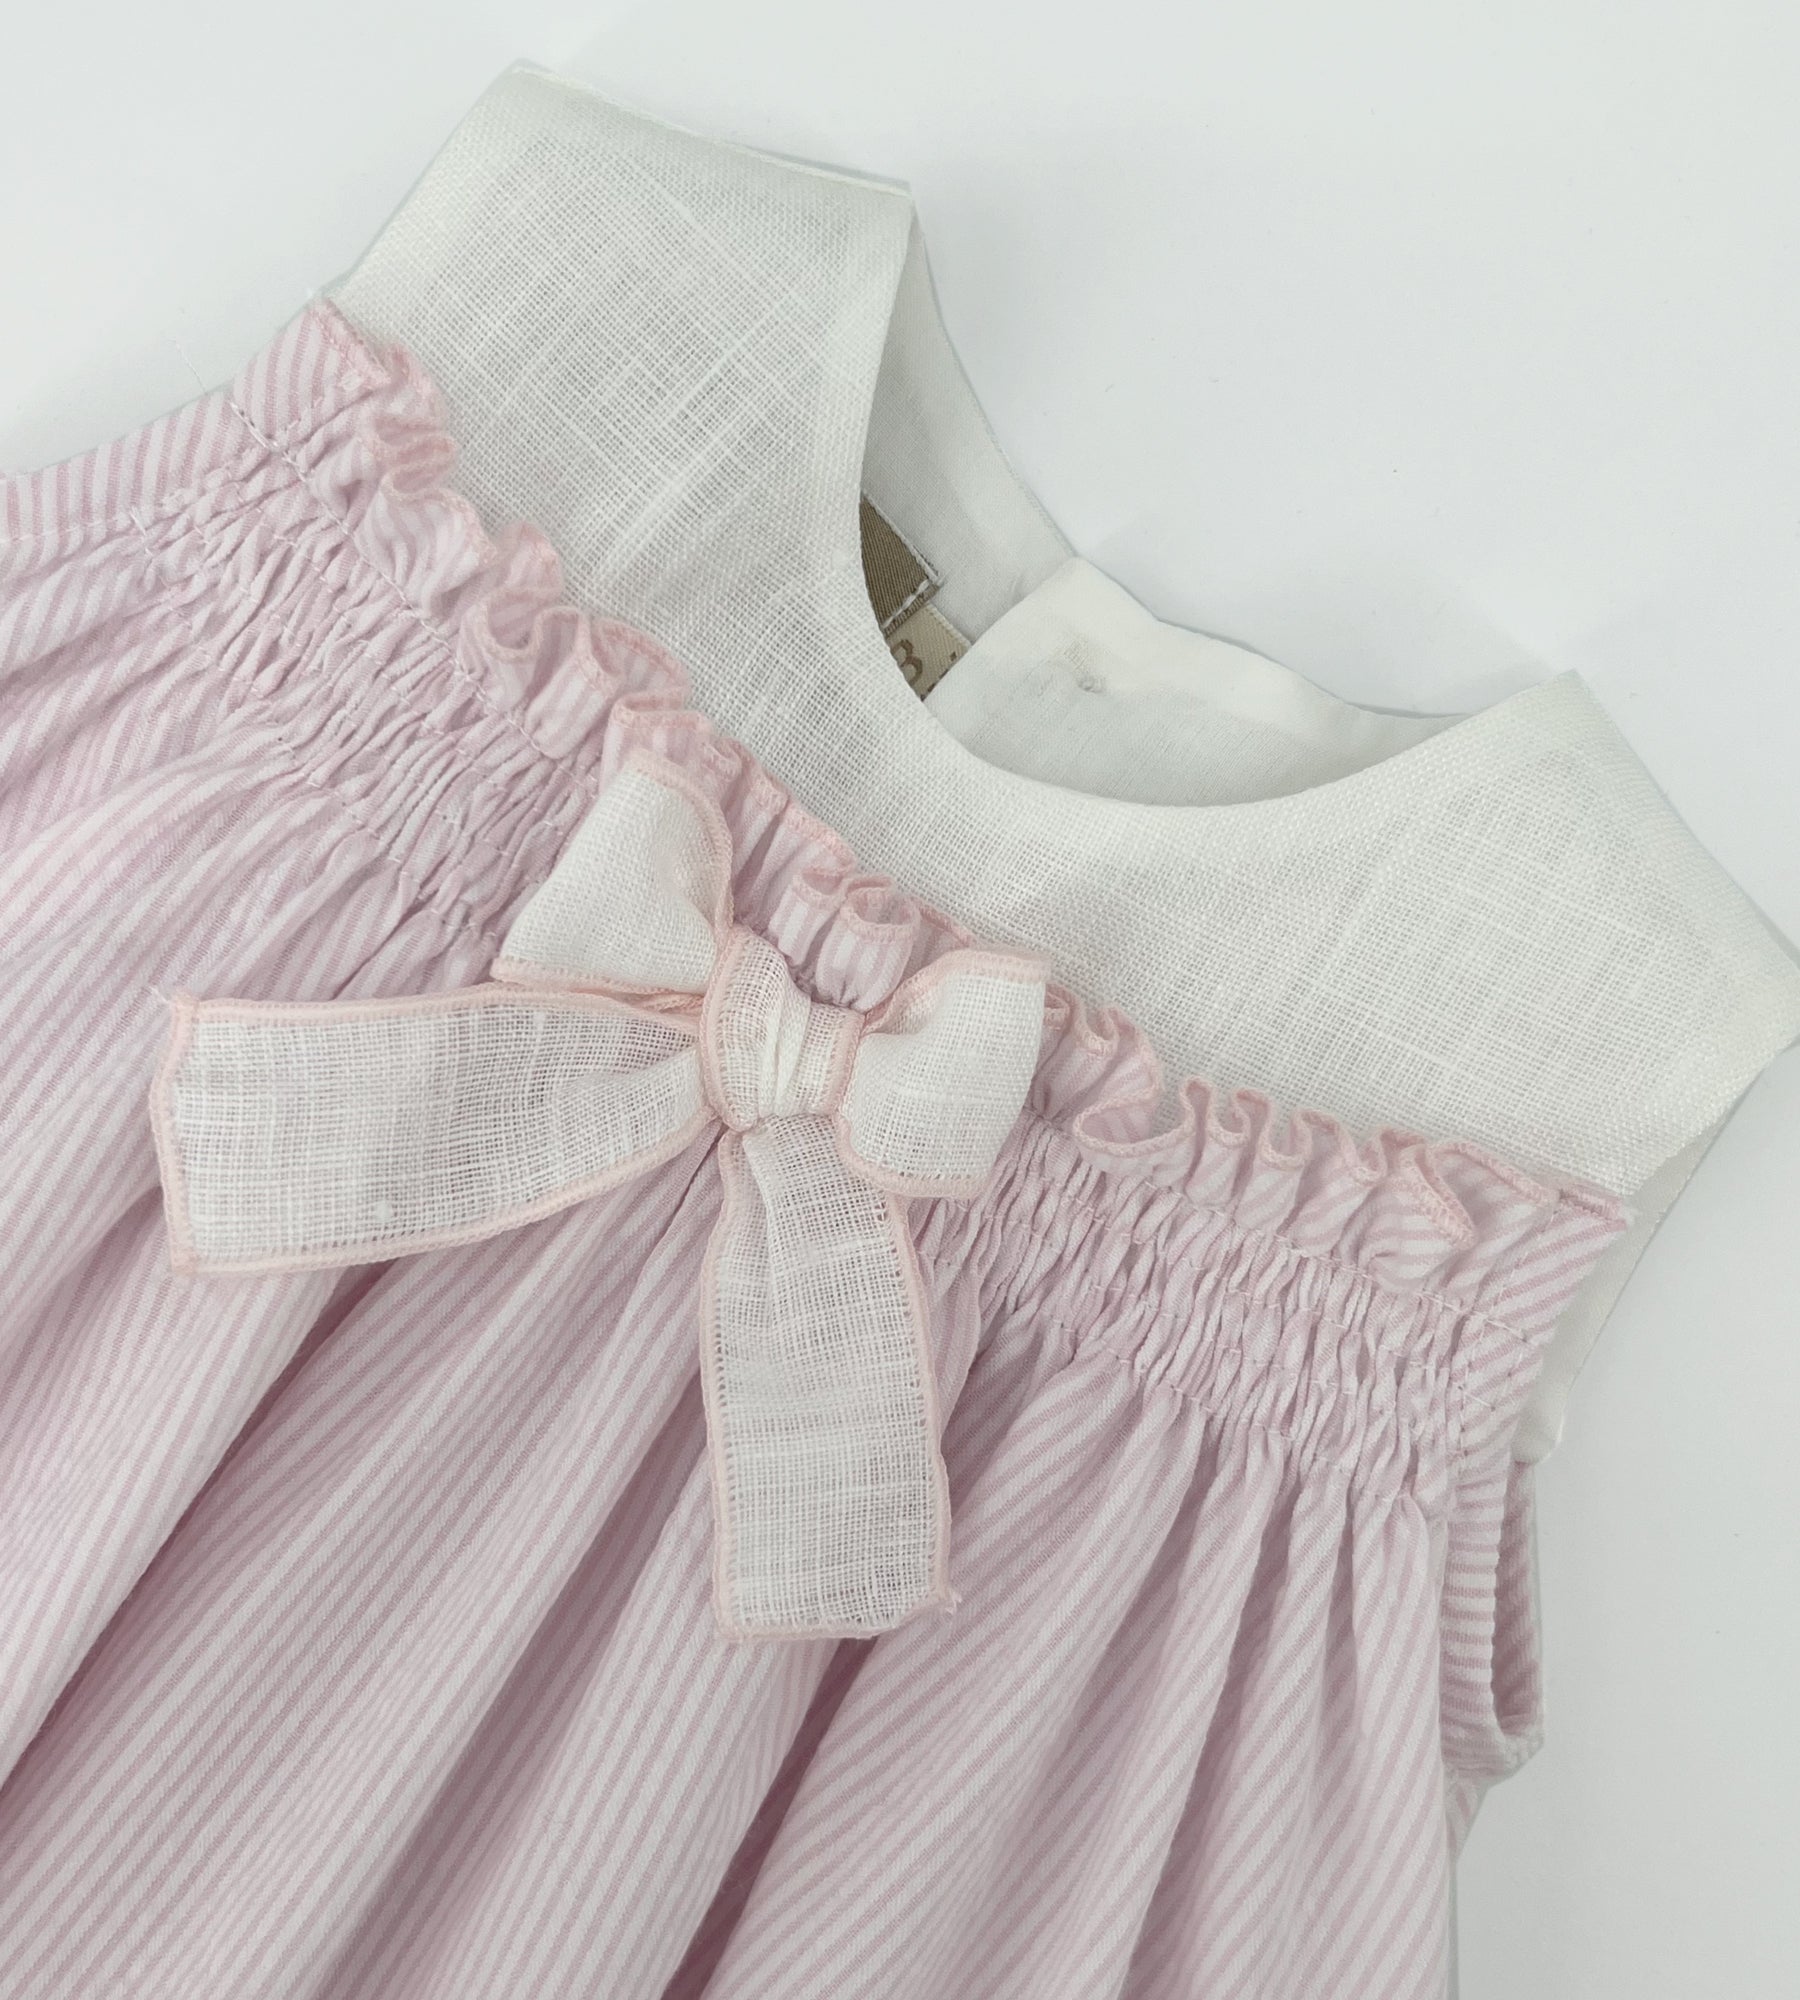 WHITE AND PINK STRIPED DRESS